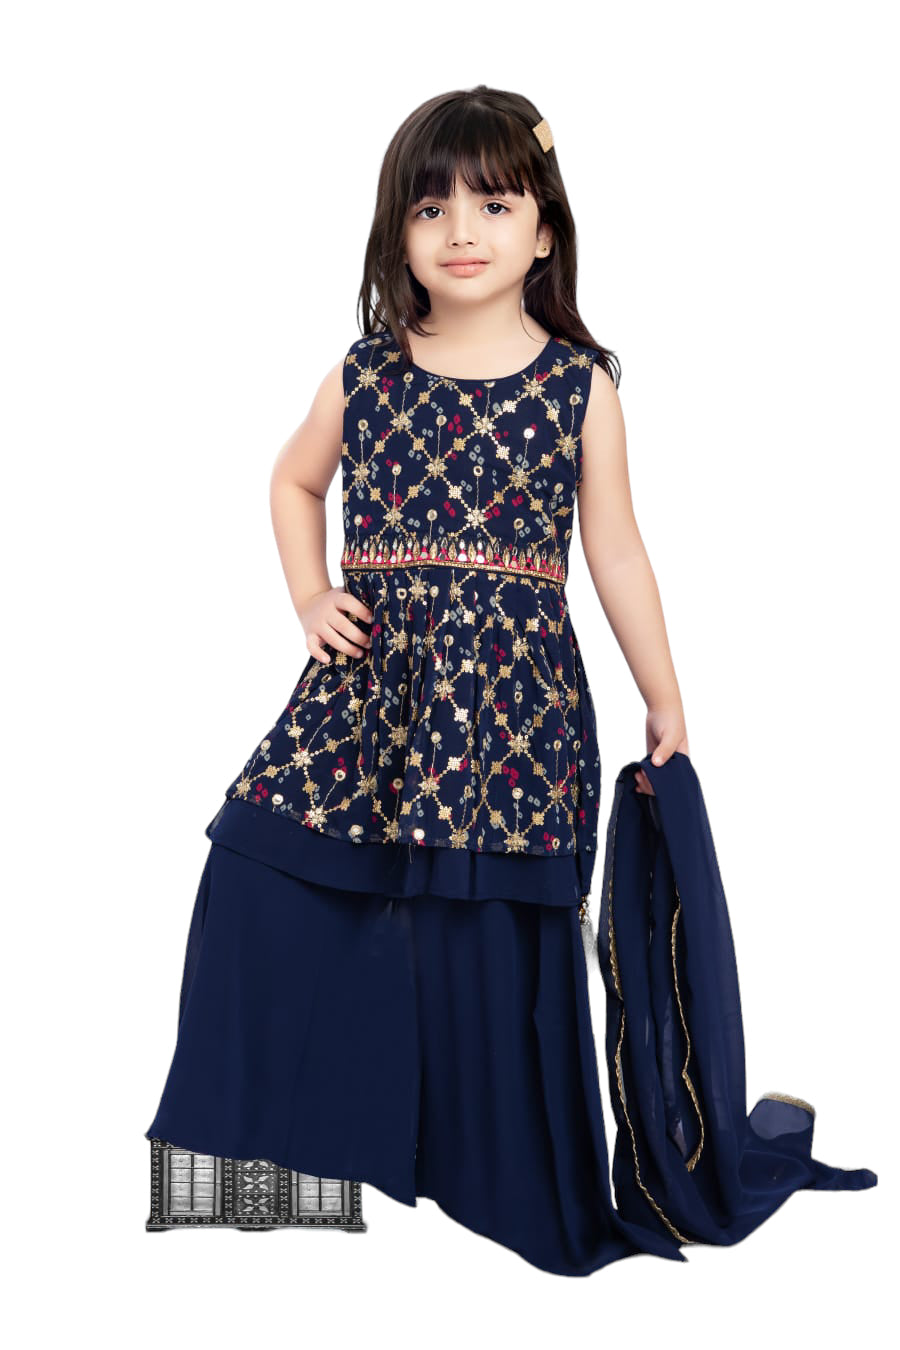 NAVY BLUE COLORED ANARKALI SUIT SET WITH THREAD EMBROIDERY PAIRED WITH PLAIN BOTTOM AND DUPATTA